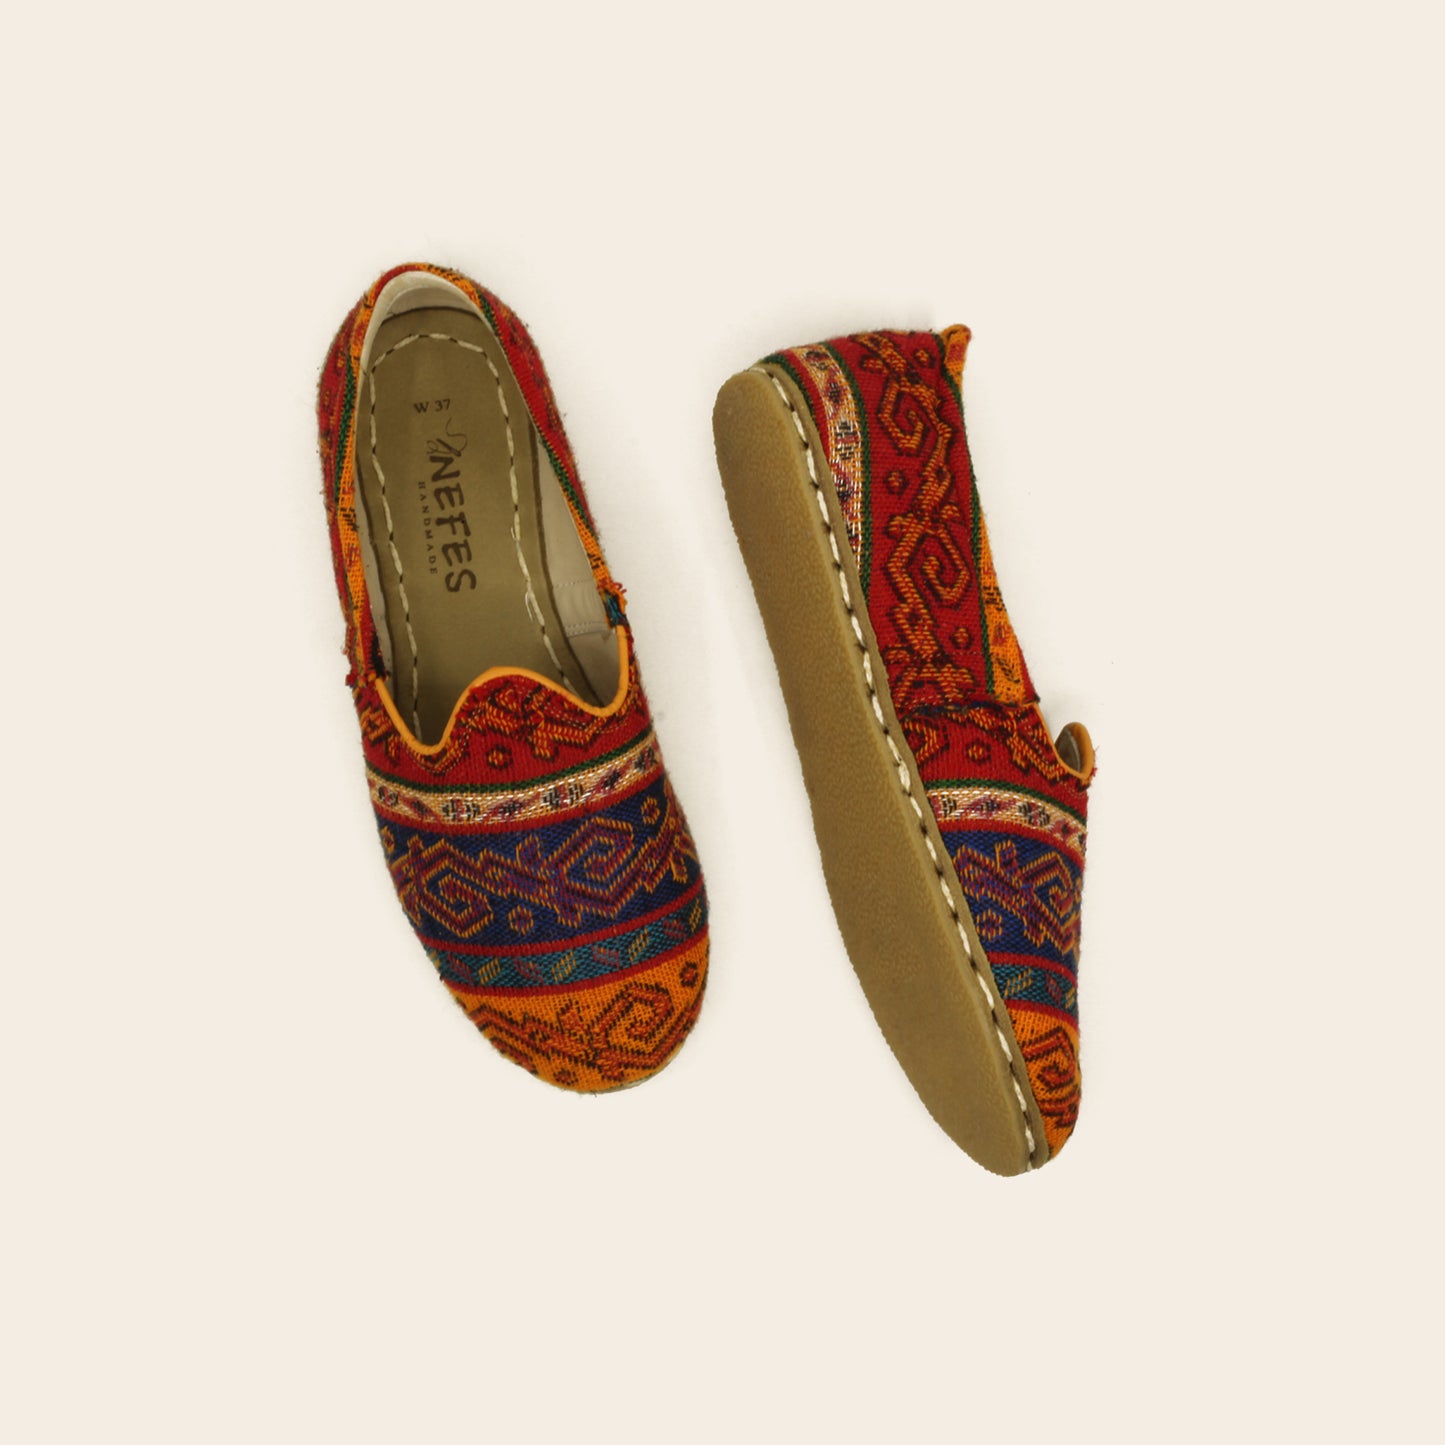 Turkish Carpet Handmade Leather Shoes For Women - Nefes Shoes